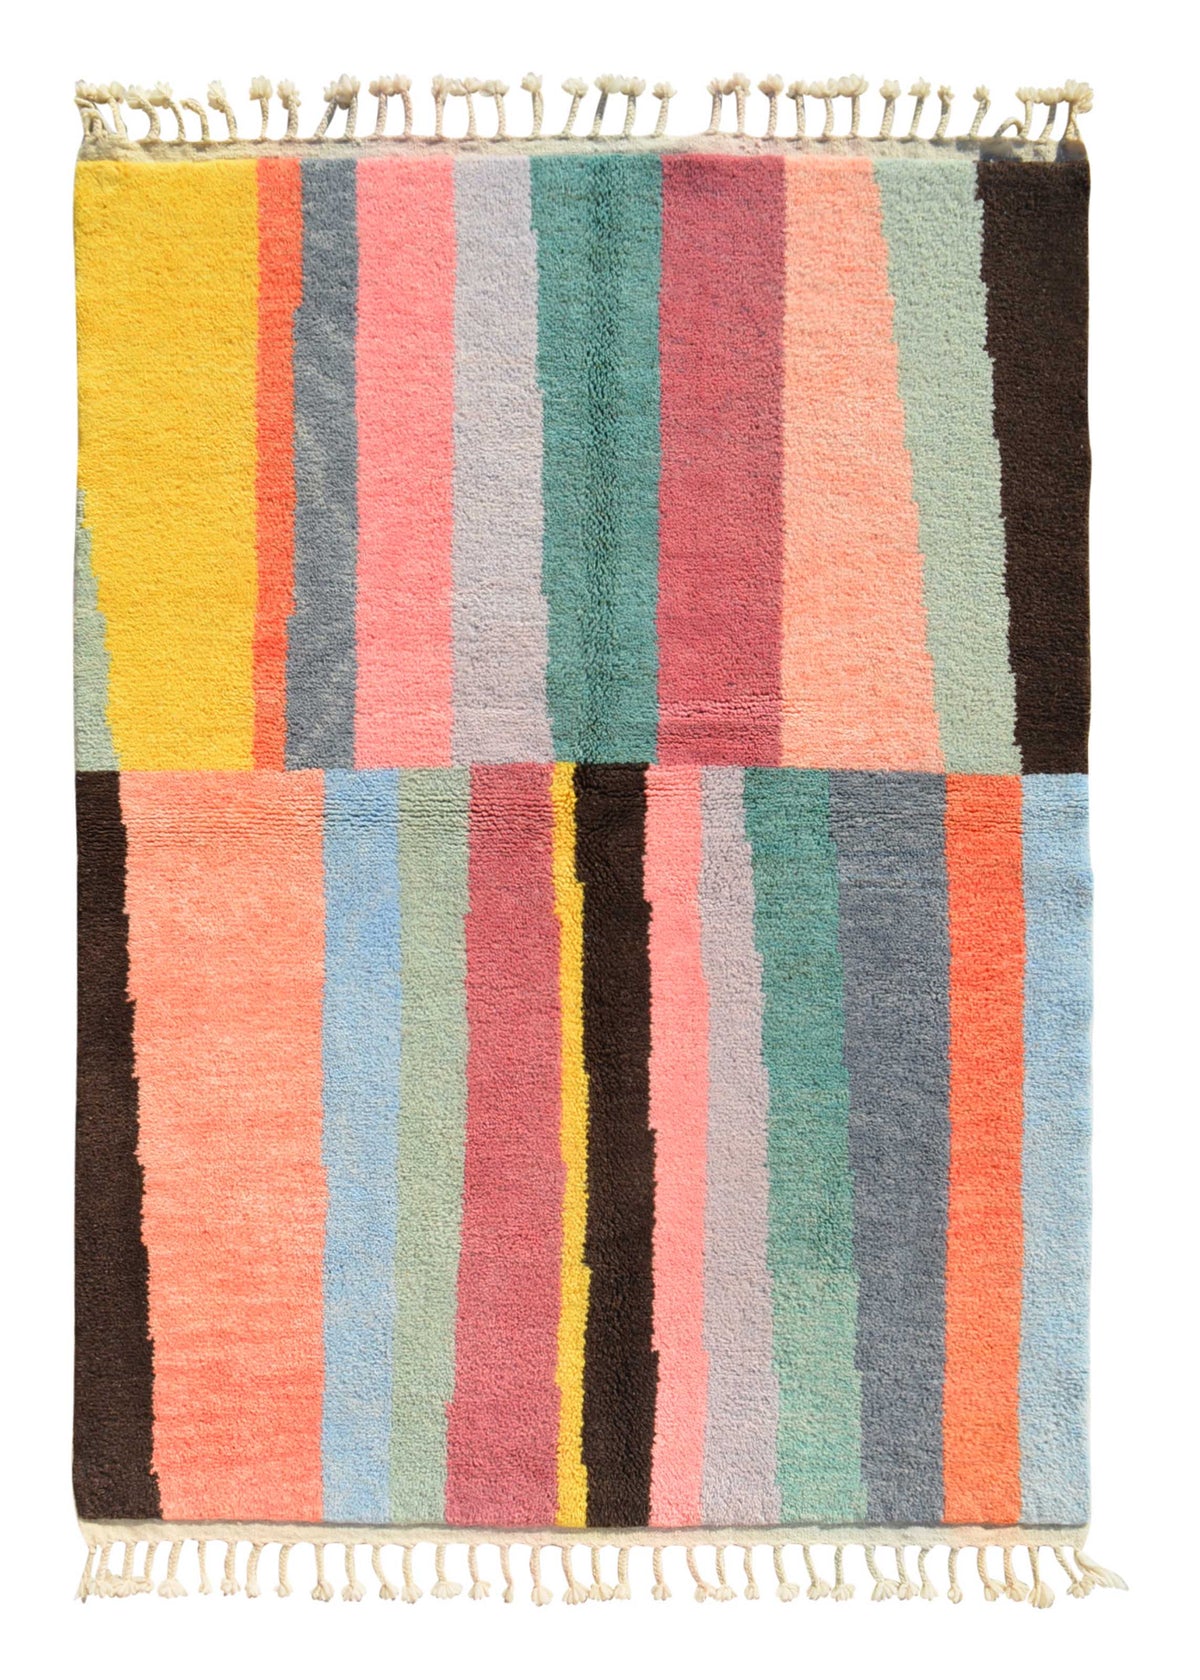 Moroccan Rug Color Craze - Handmade Moroccan Rug with a colorful design - Add a touch of excitement to your home Illuminate Collective